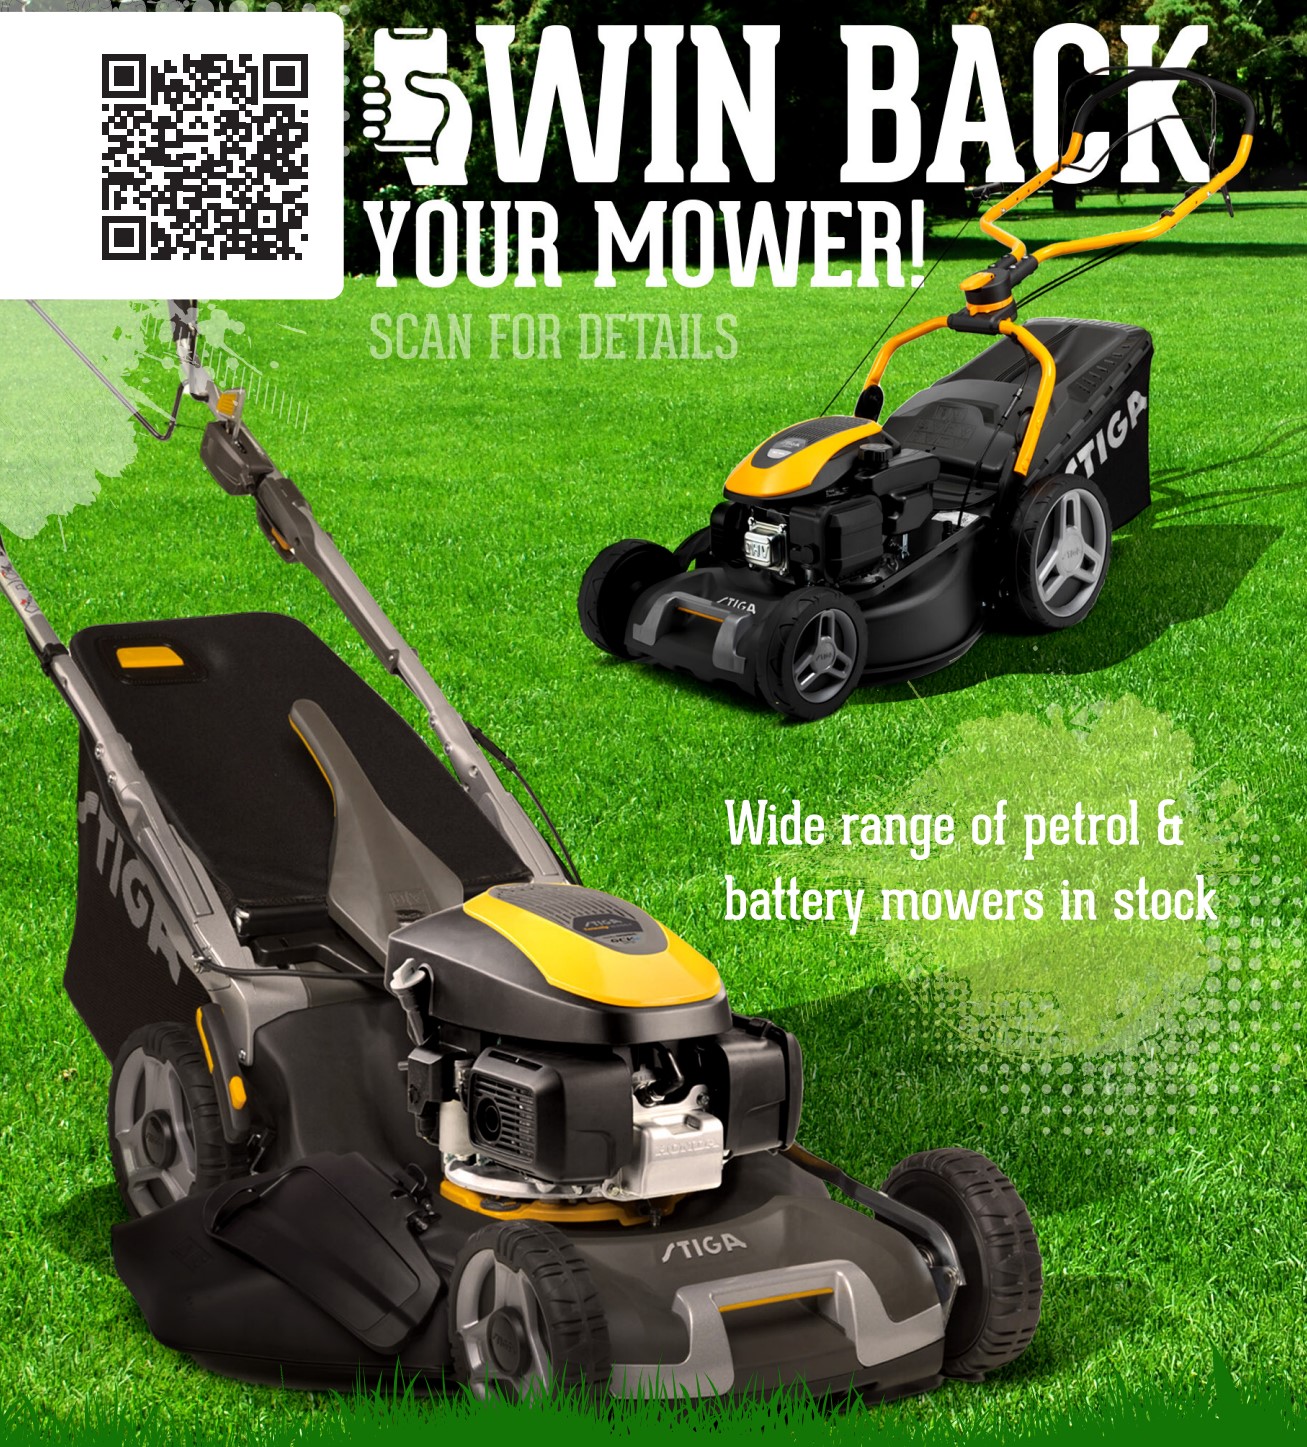 Win Back Your Mower with text